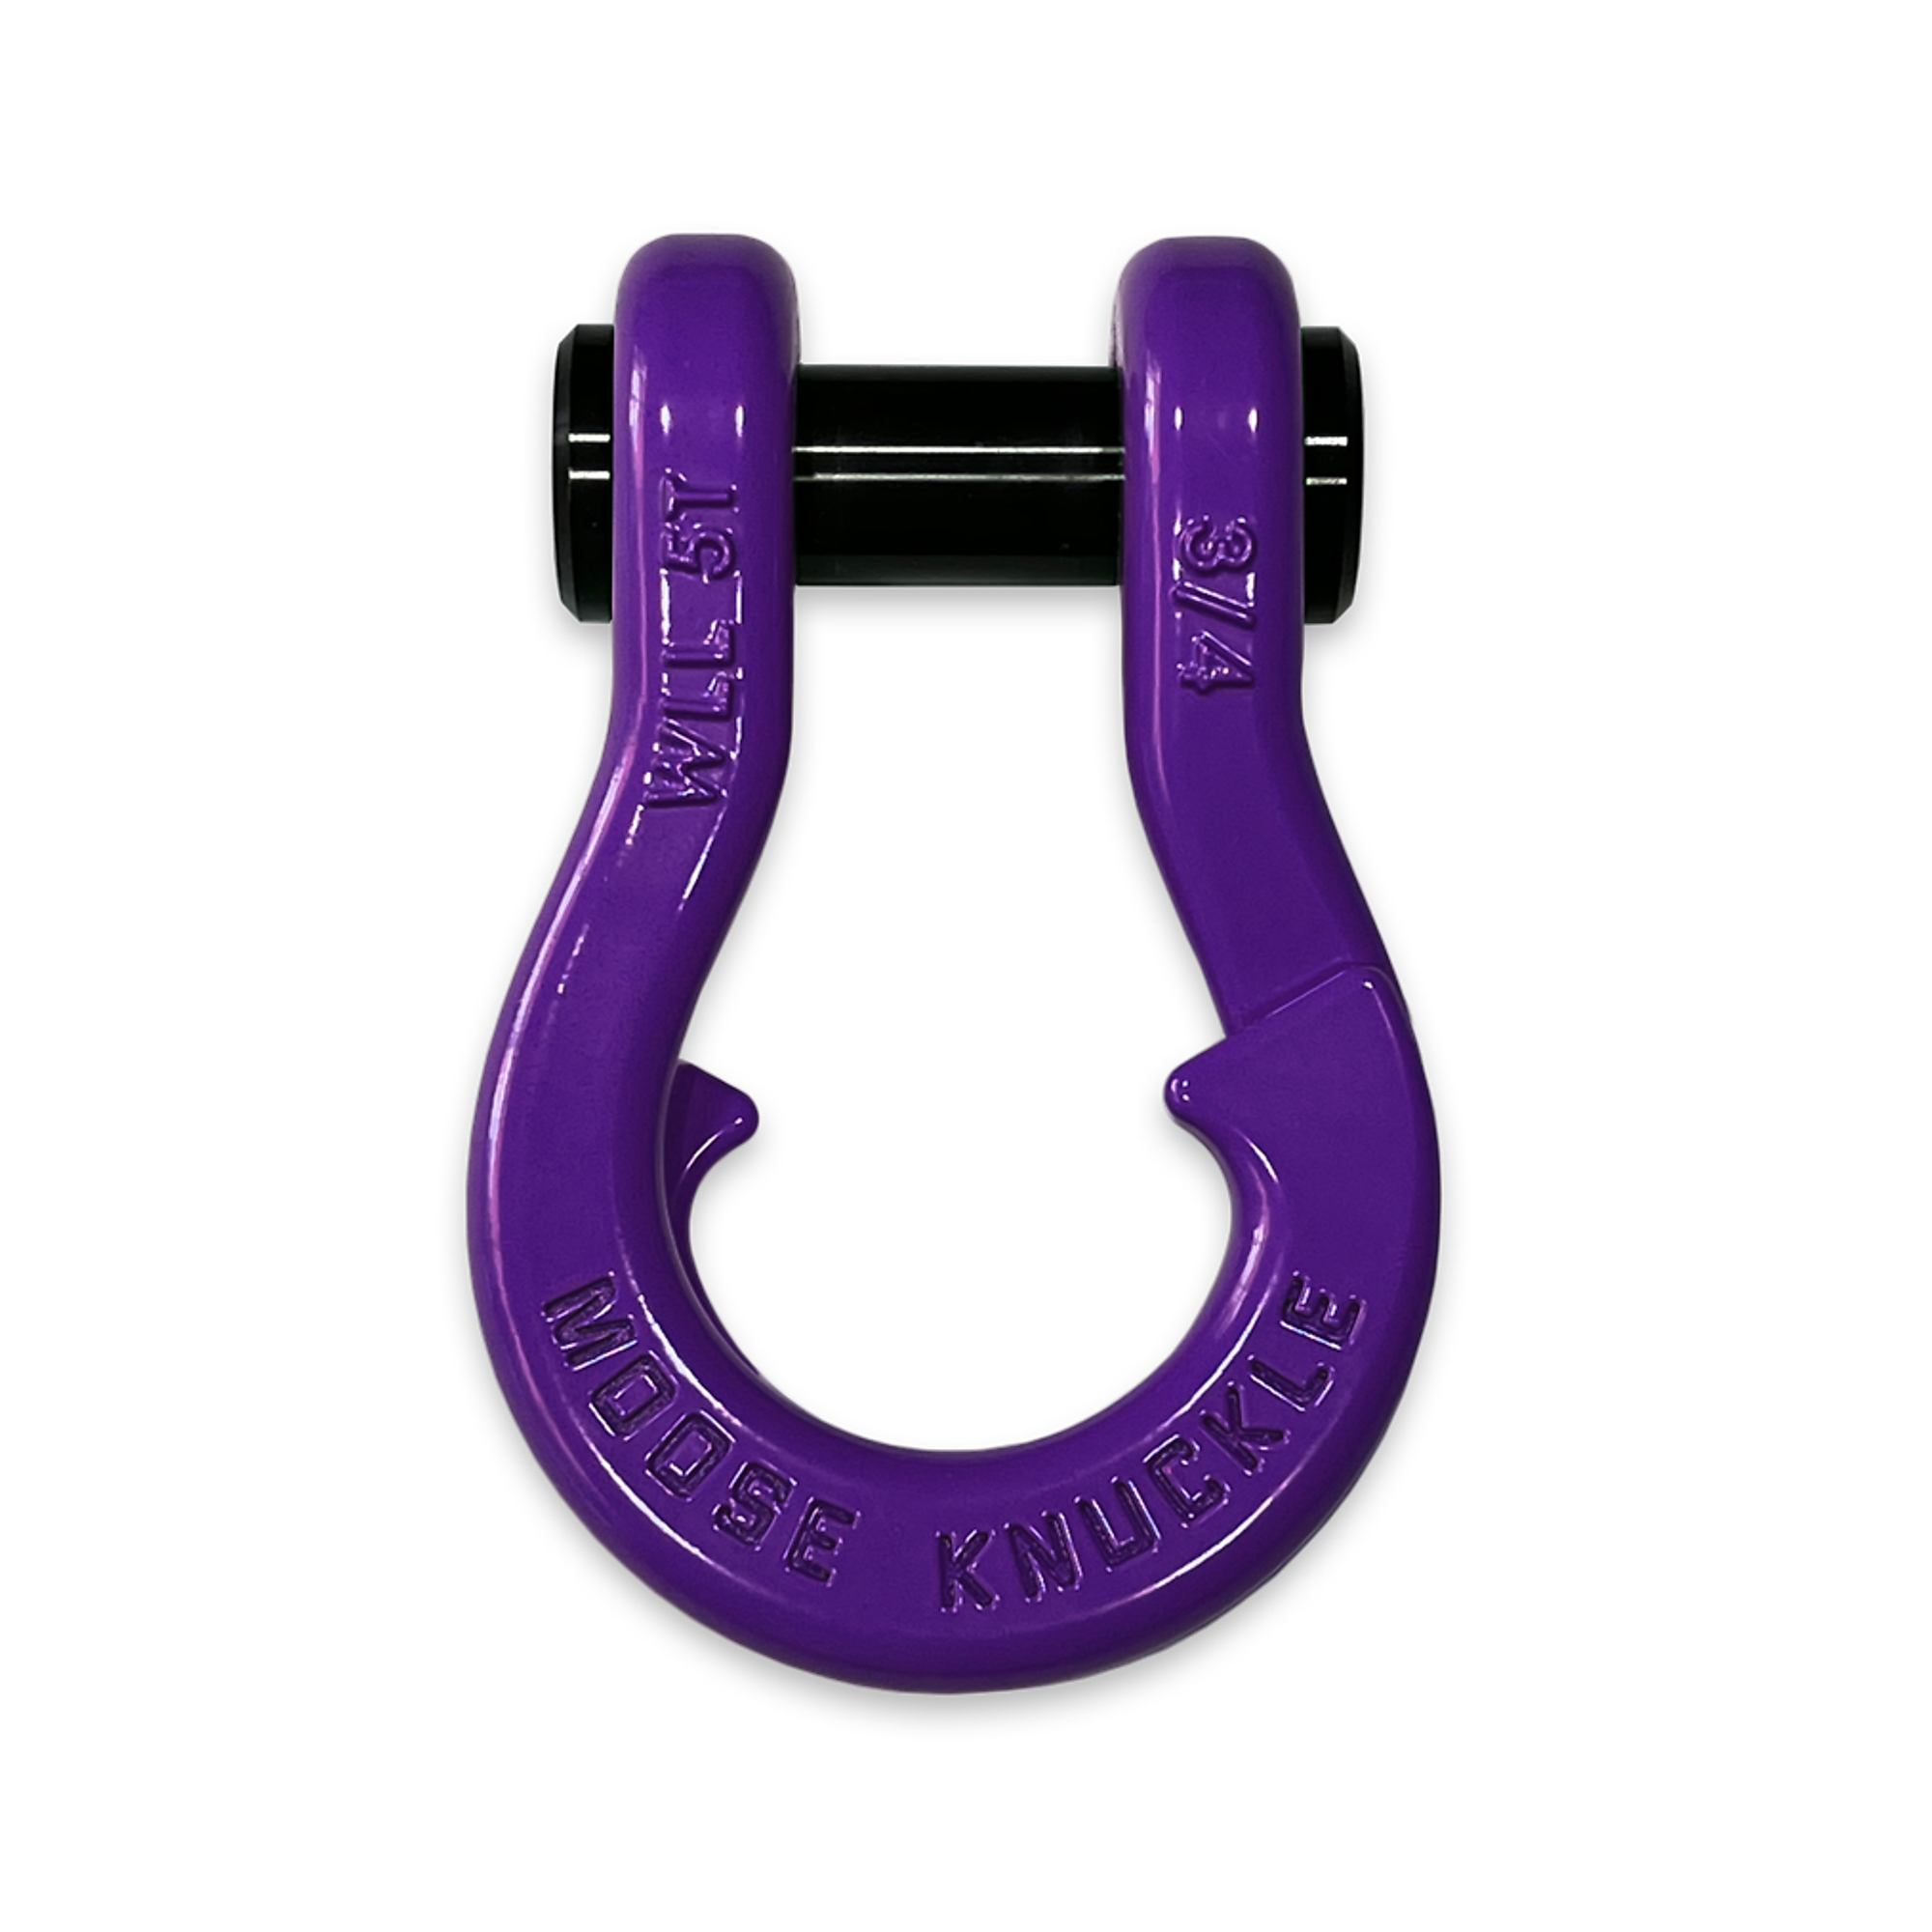 Moose Knuckle Offroad, Grape Escape Purple 3/4Inch Recovery Towing Split Shackle, Working Load Limit 10000 lb, Model FN000020-004